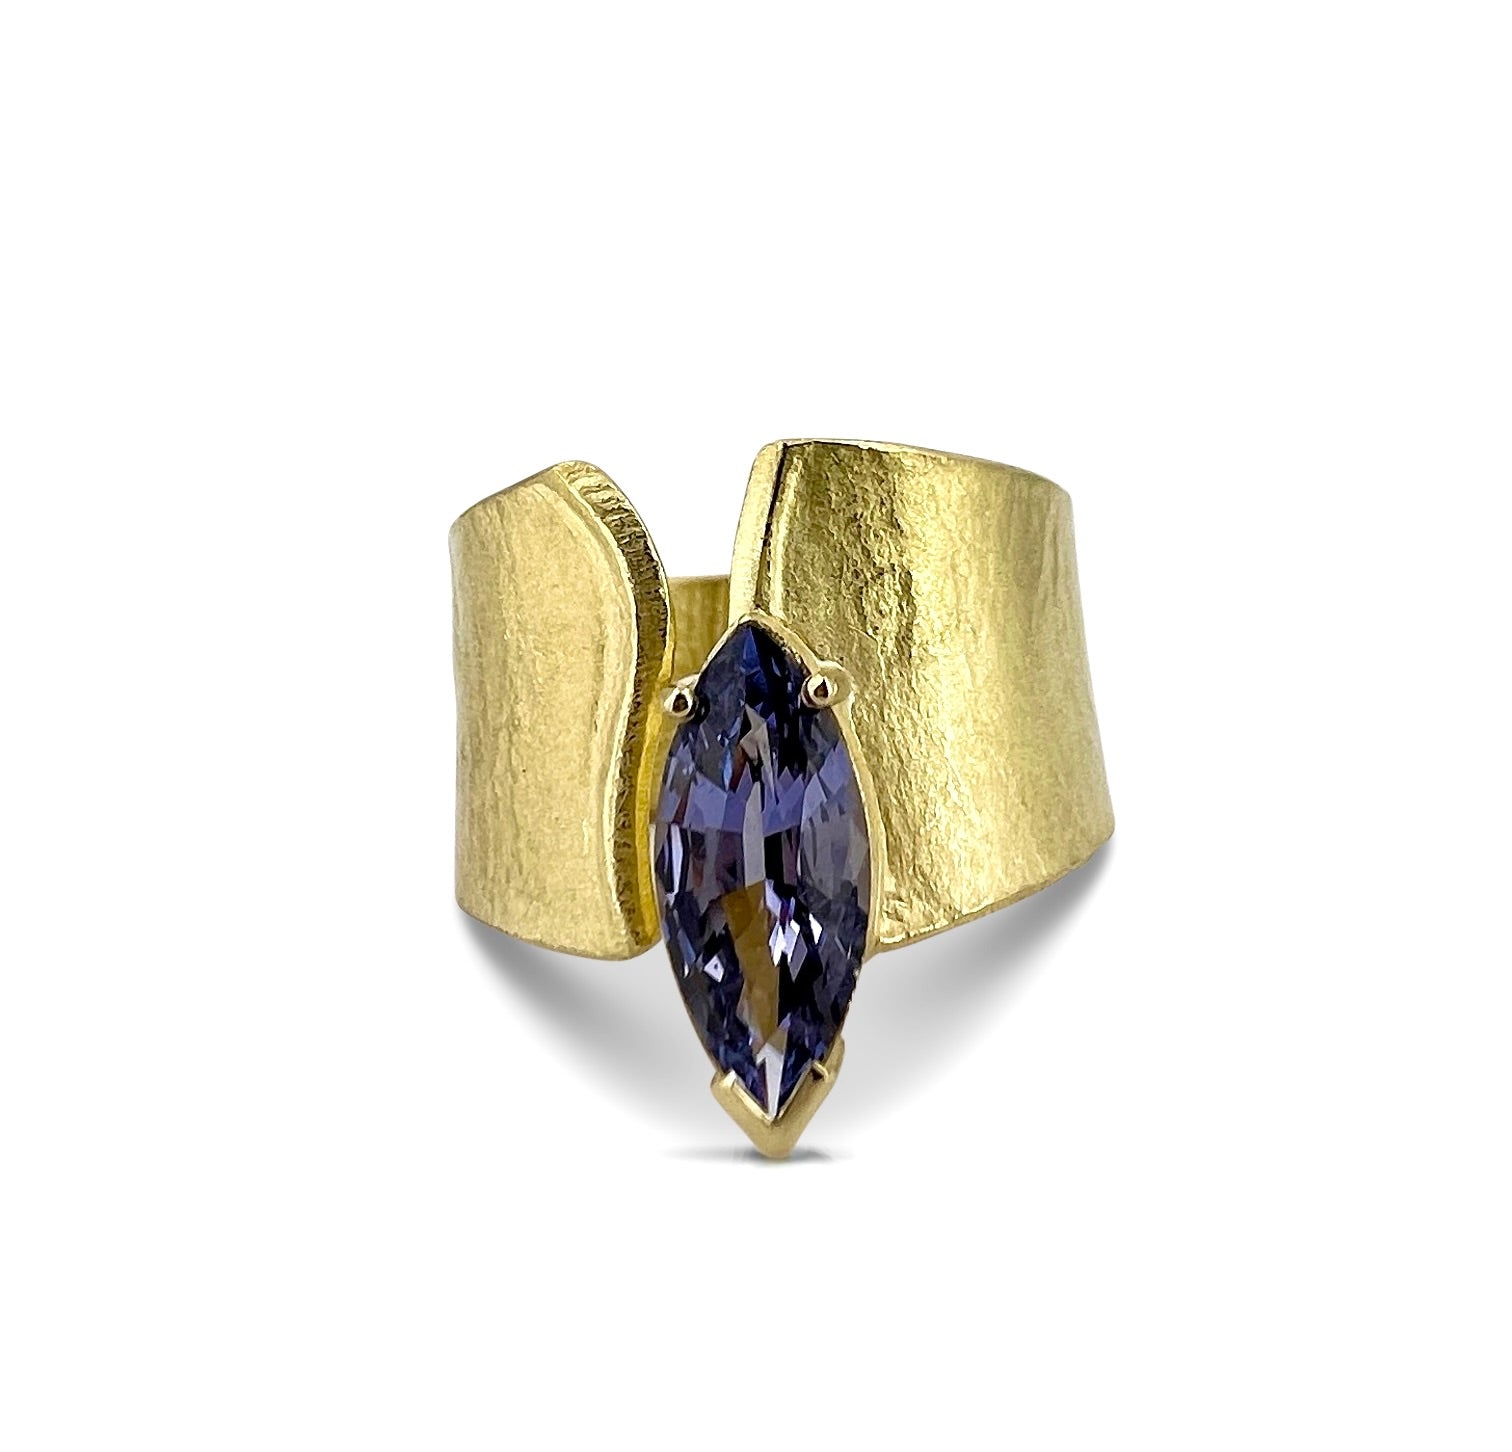 Wafer ring in 18K yellow gold with purple spinel